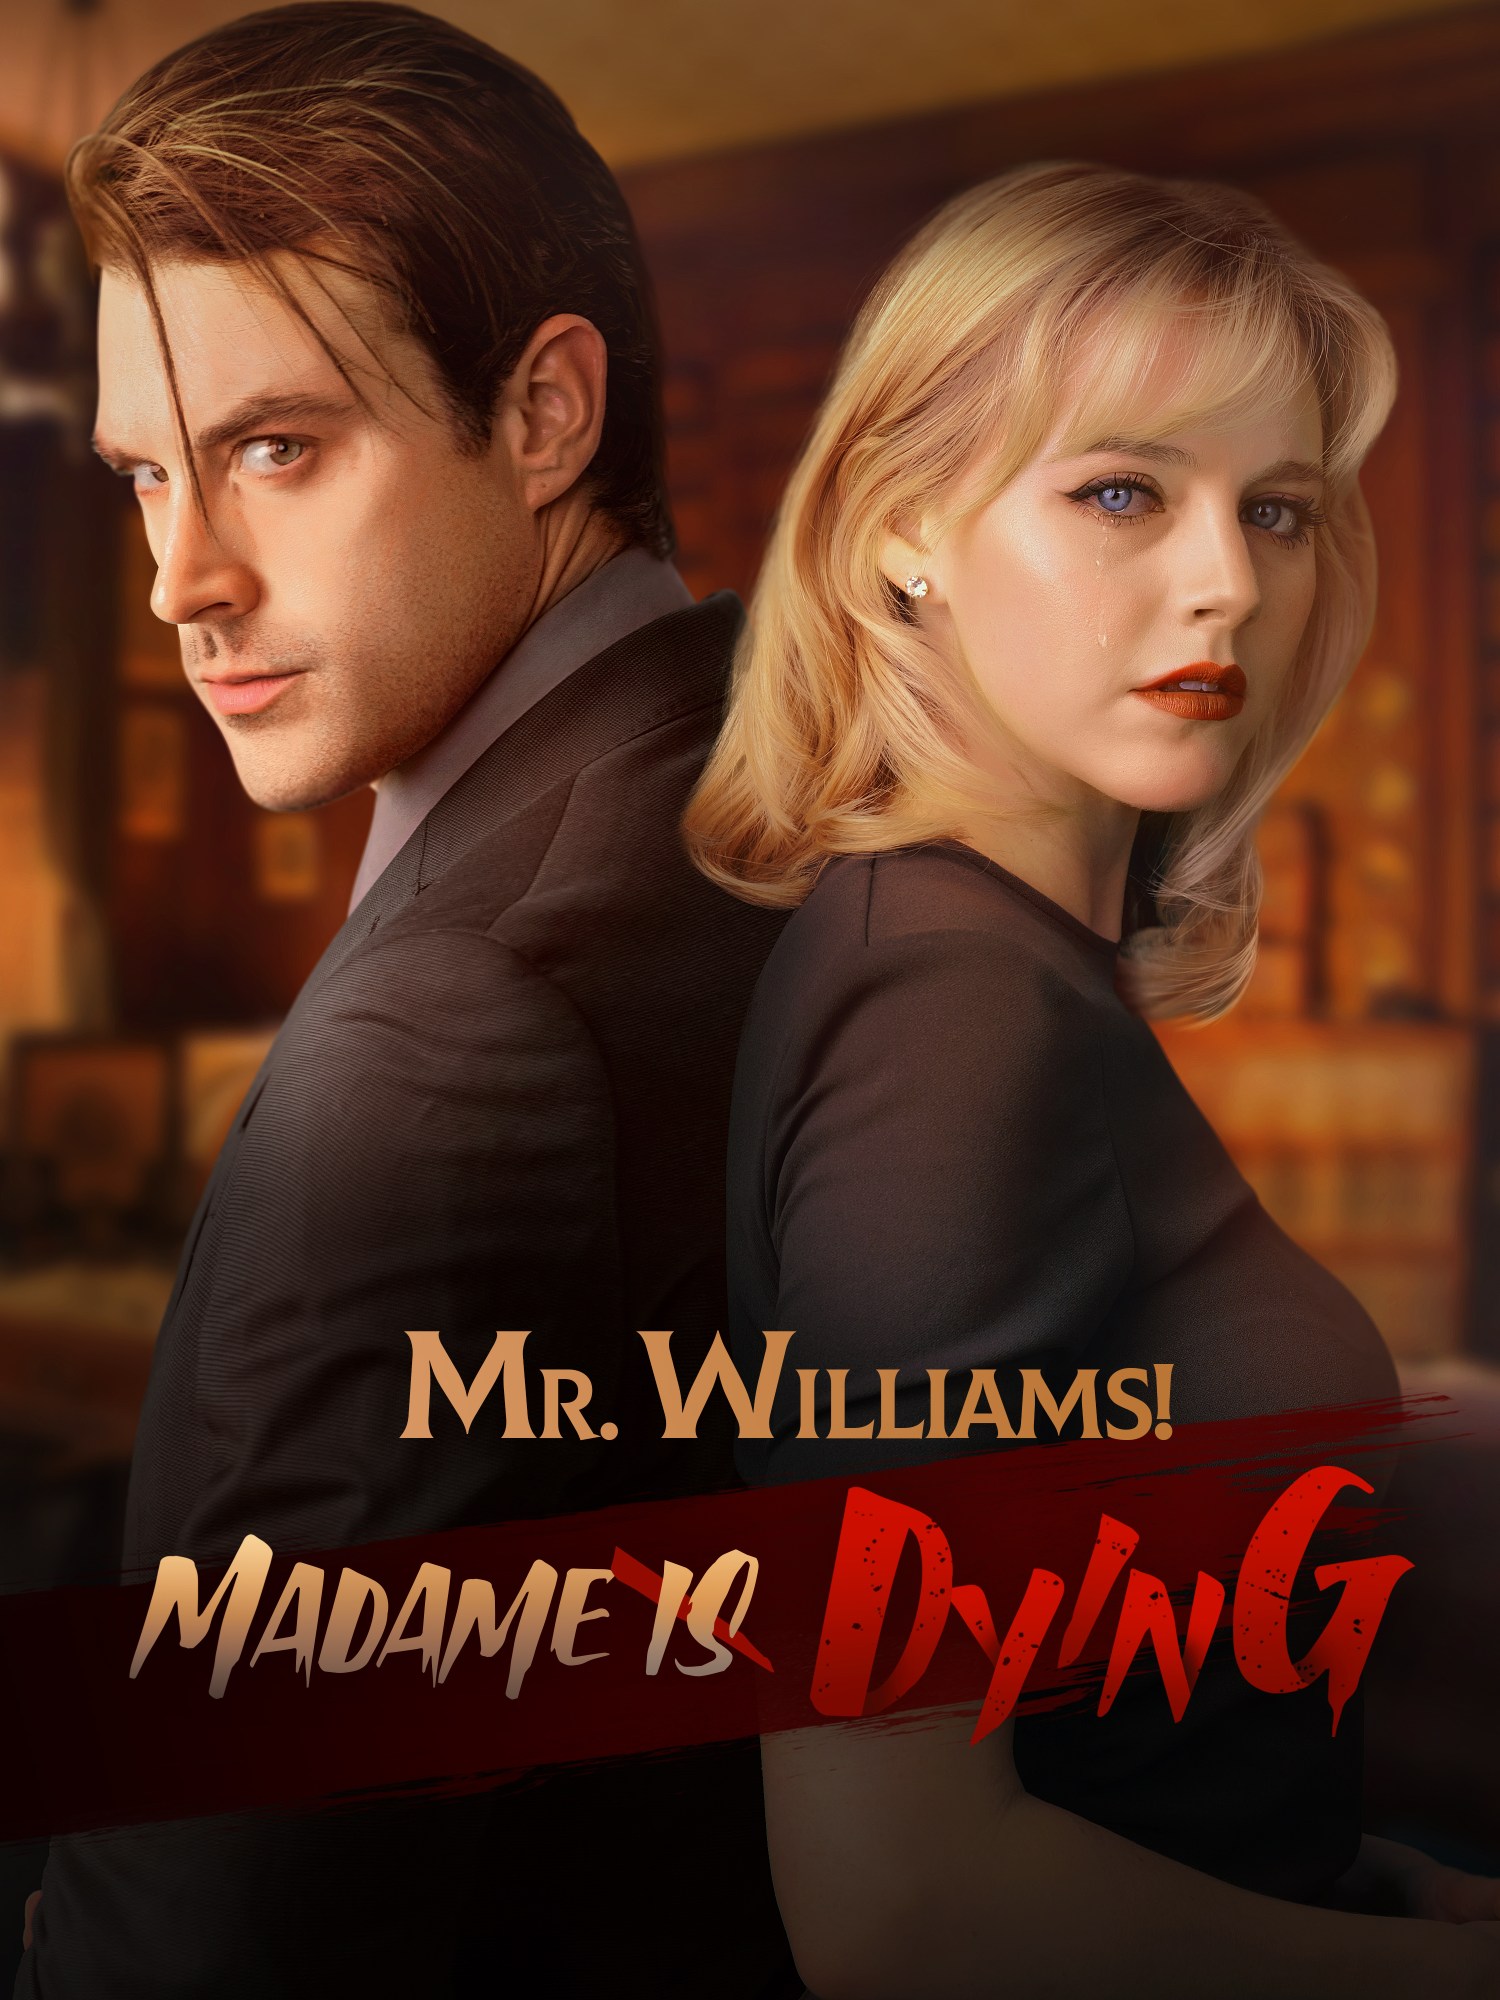 Poster of the short drama "Mr. Williams! Madame Is Dying," showing the two protaganists.